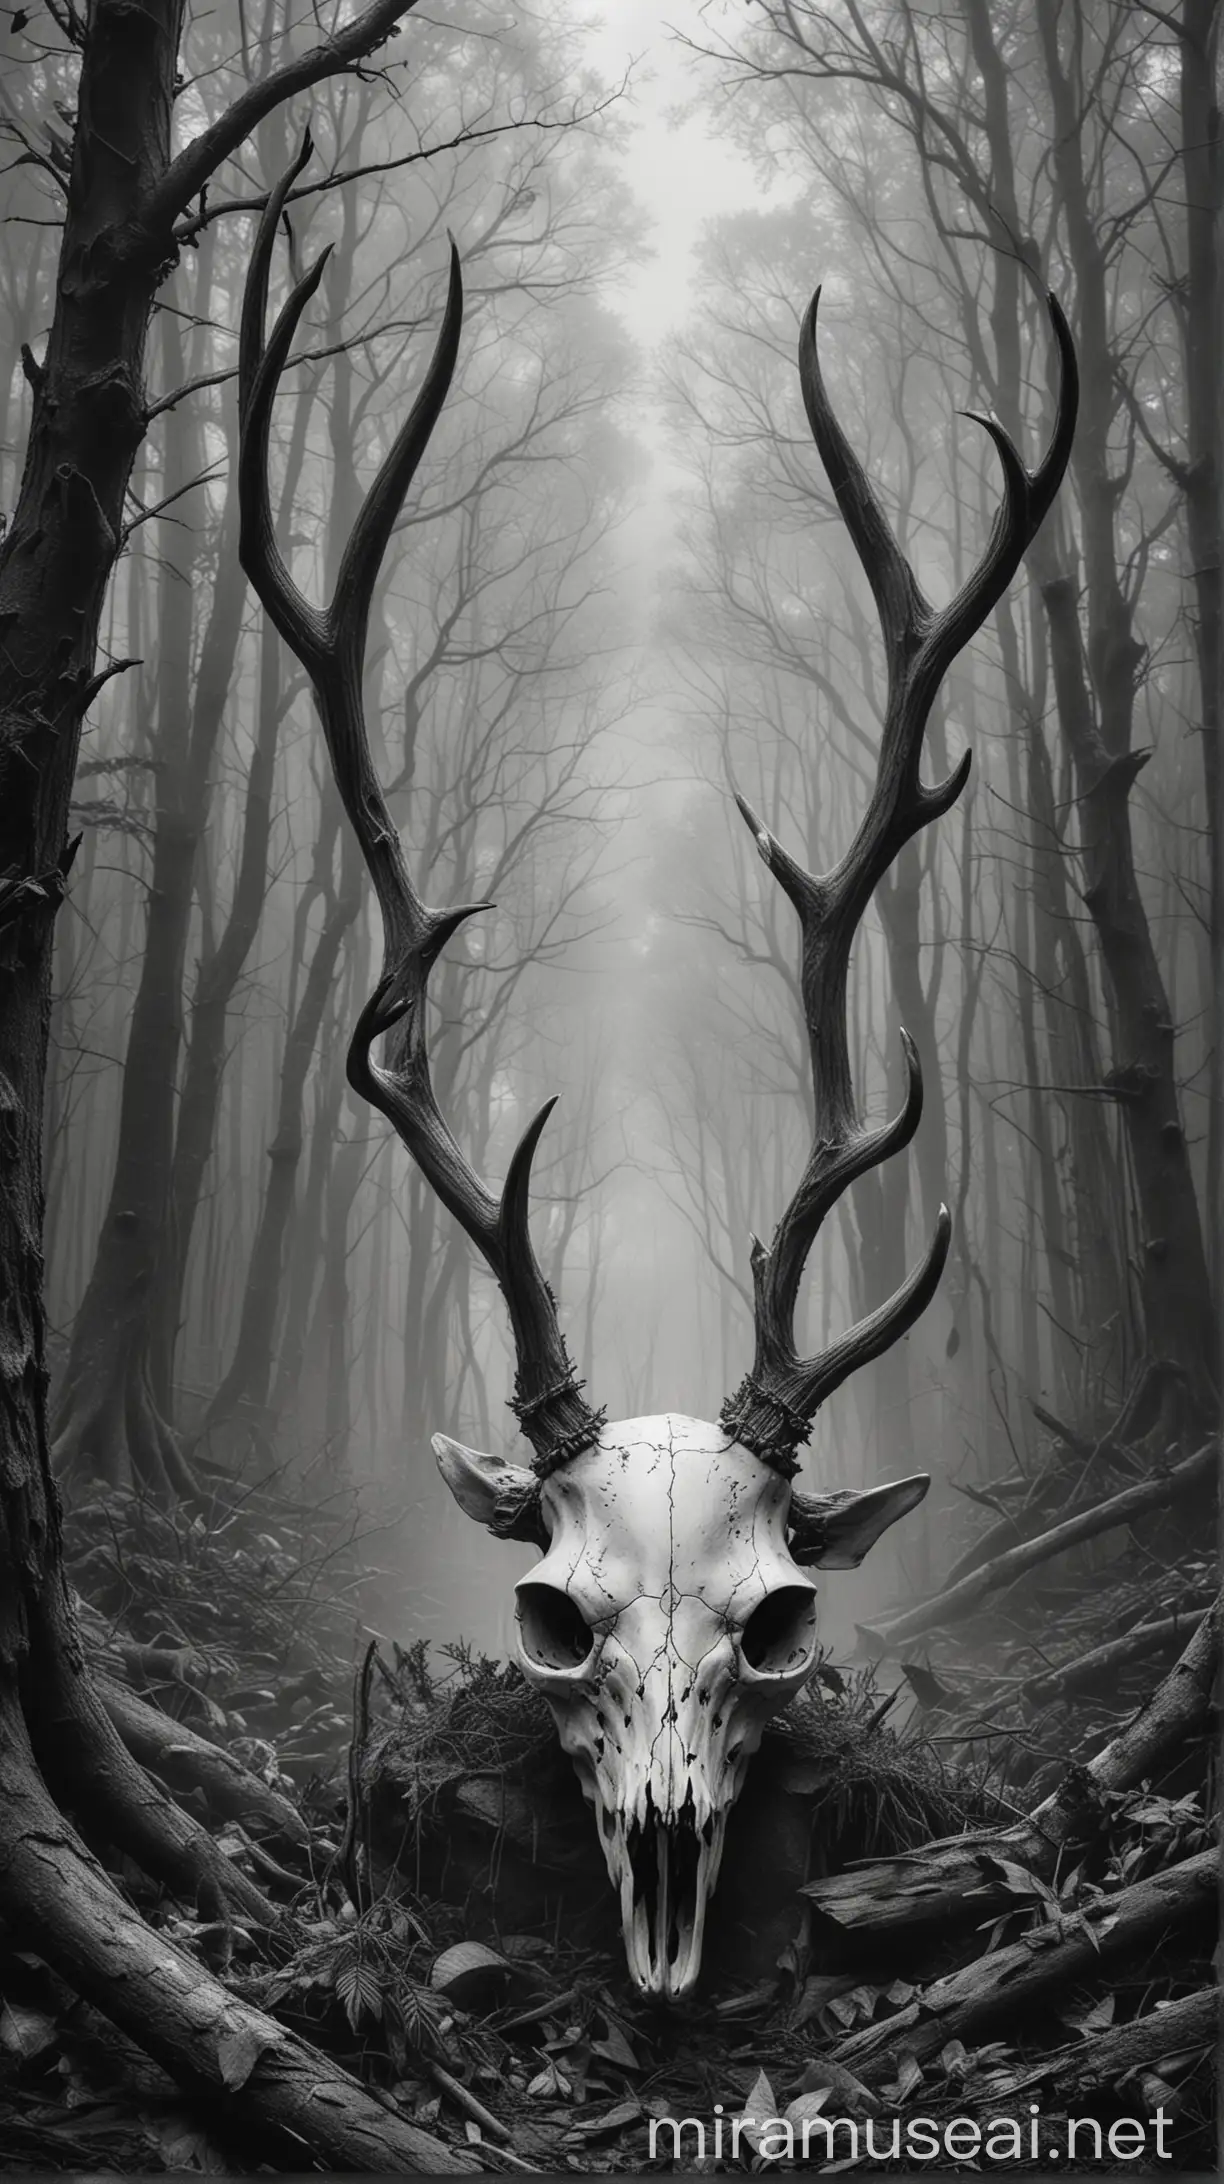 deer skull art made with black and white sketch in gloomy foggy dark forest